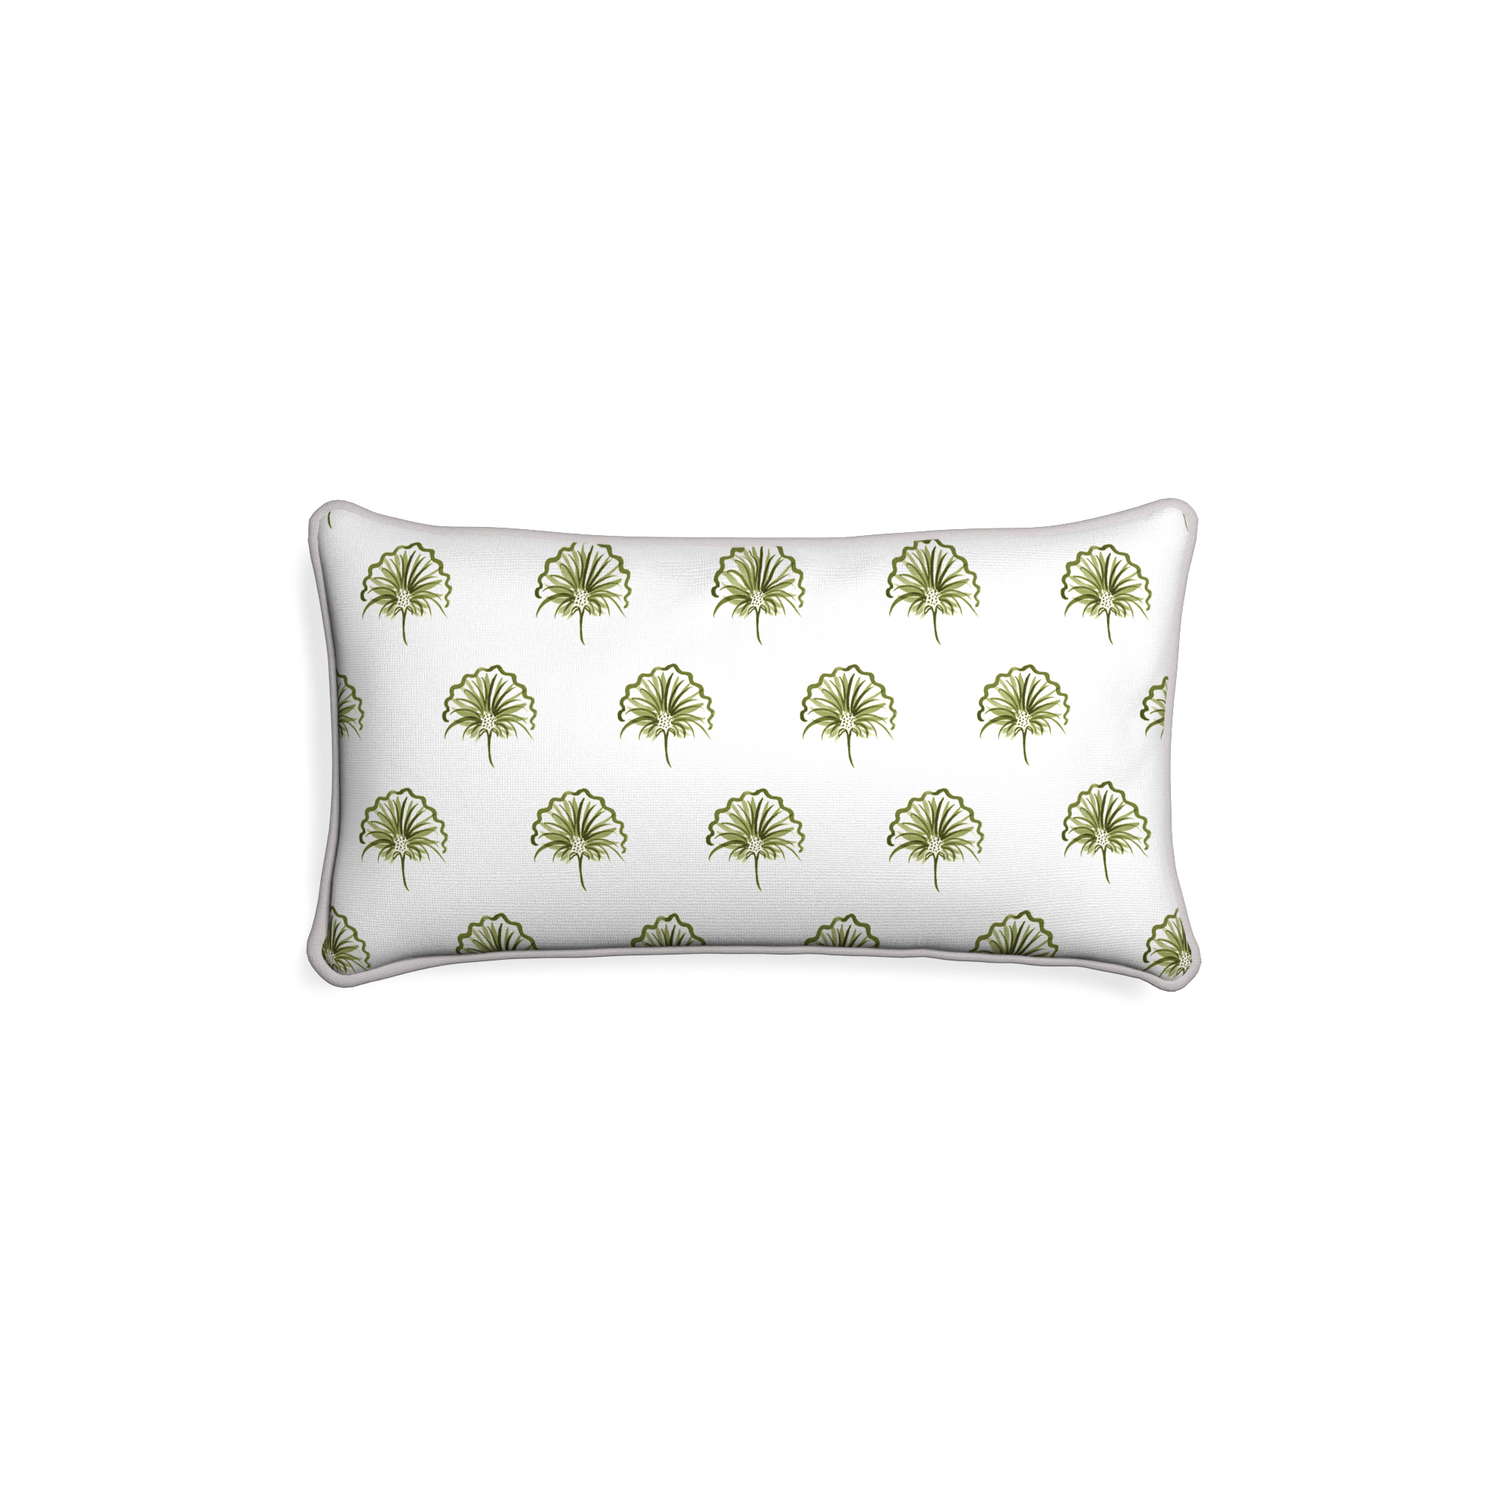 Petite-lumbar penelope moss custom green floralpillow with pebble piping on white background